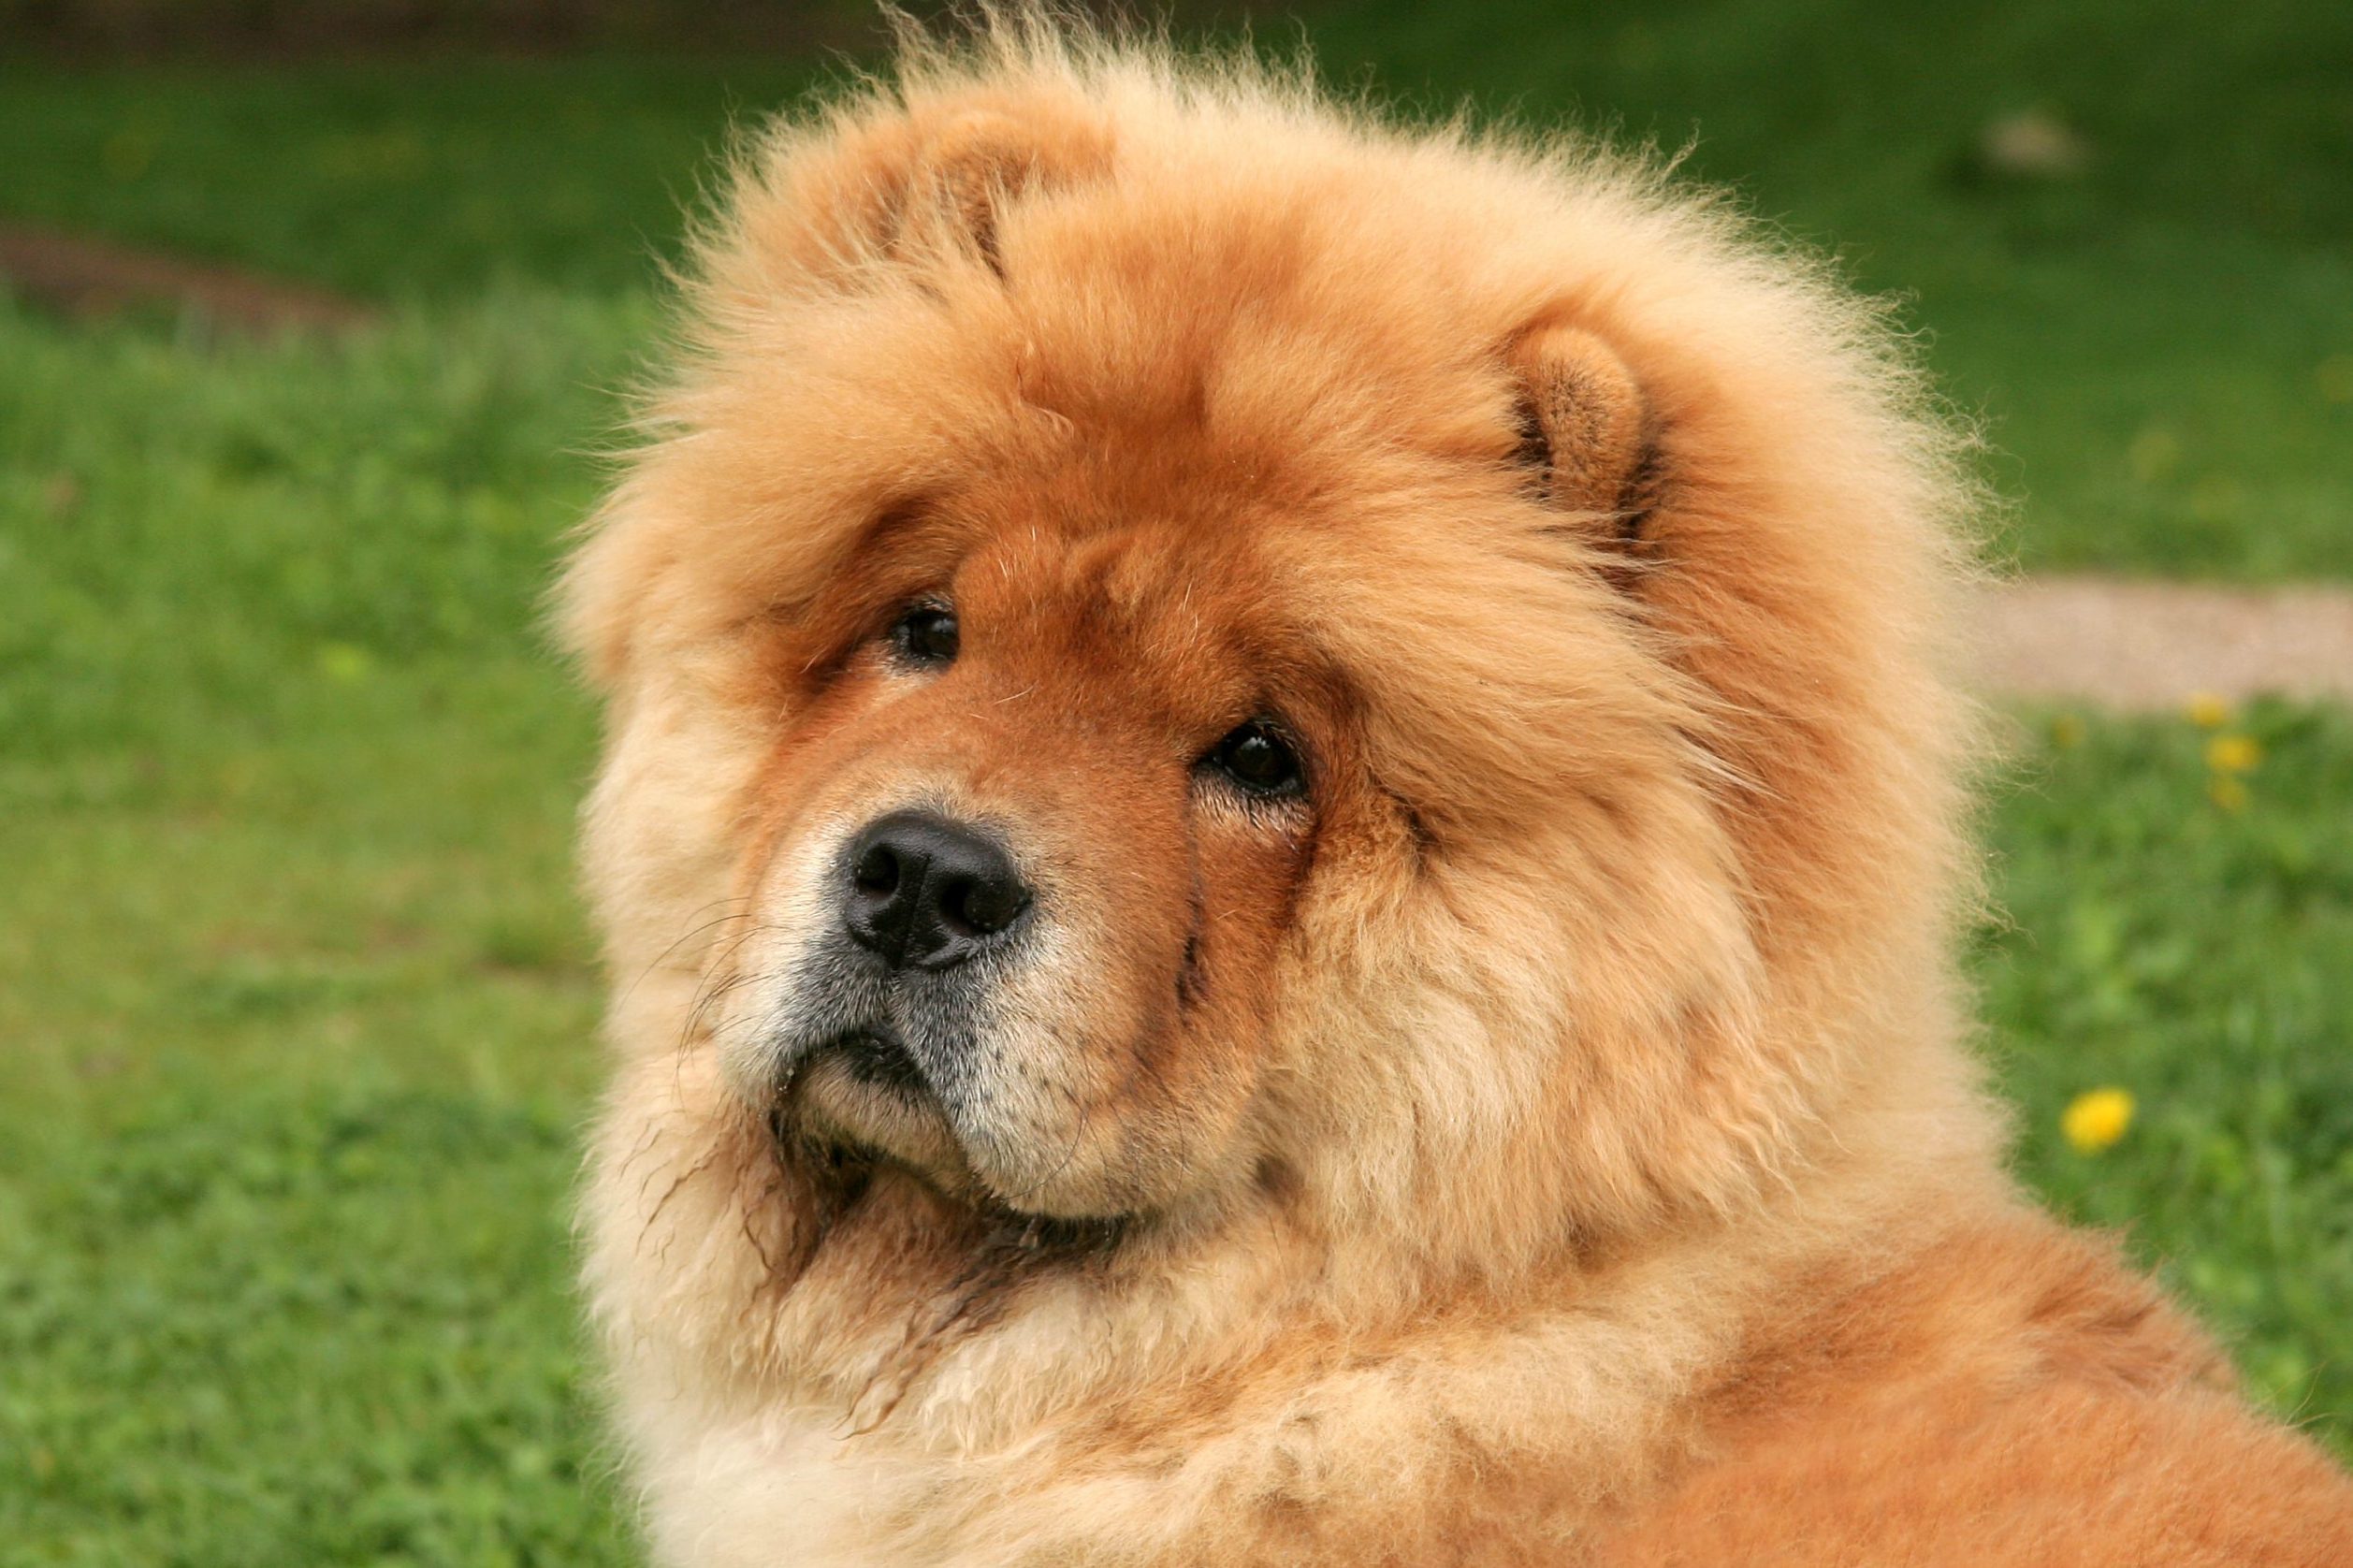 Cute chow-chow puppy sitting on grass